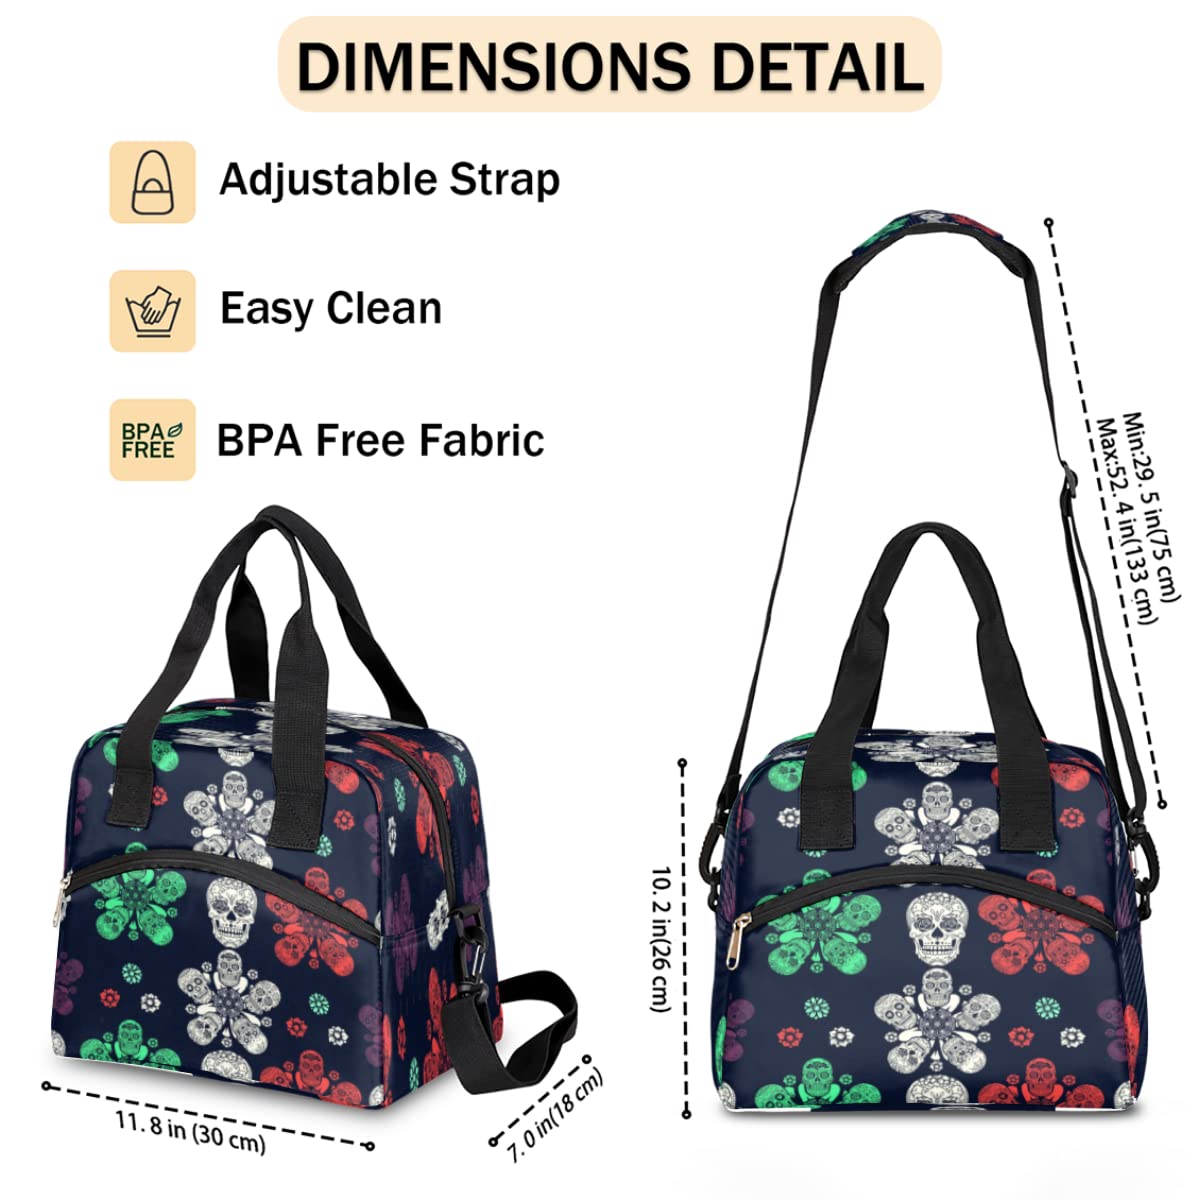 Insulated Lunch Bag for Women Men Colorful Floral Goth Mexican Skull Lunch Box Reusable Lunch Cooler Bag Large Lunch Tote Bag for Work Picnic Travel School